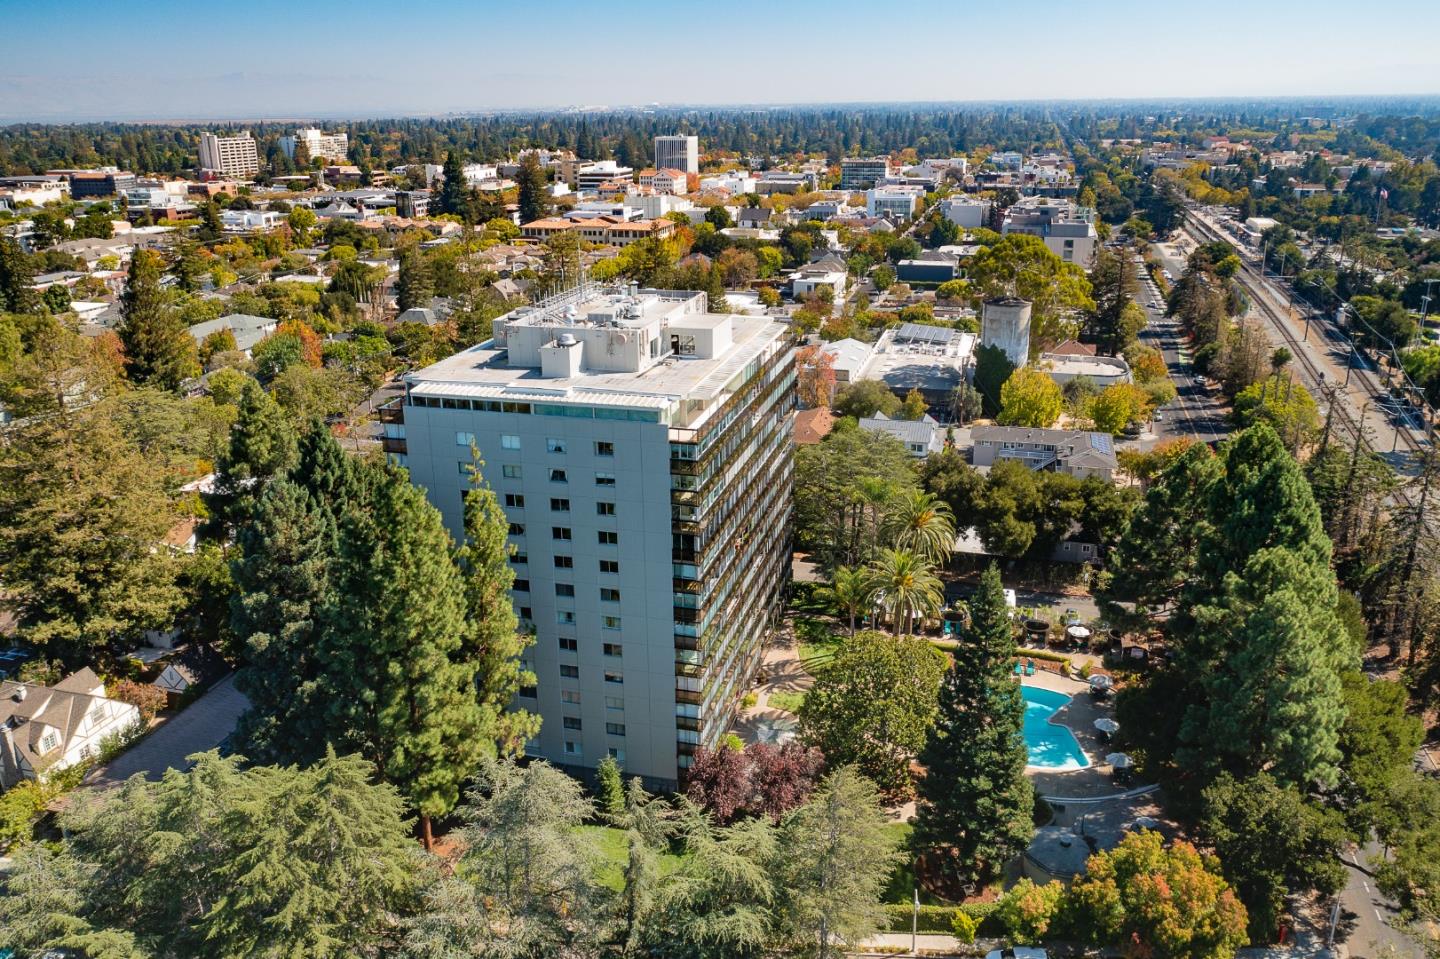 Welcome to The Palo Alto, a luxury condominium complex with 24/7 security, located within walking distance to Stanford University and Medical Center, University Avenue, and the Stanford Shopping Center, a premier outdoor mall. Spacious and sophisticated, this 1032 sq ft 1BR/1BA condo offers a quiet space to live, work, and enjoy all that Palo Alto has to offer. It has been completely remodeled with quality finishes including granite kitchen countertops, custom cabinetry, and hardwood flooring throughout.  The bathroom has an added built-in storage area, marble countertops, and stone tiles. There's a dining alcove just off the kitchen and a lovely office space adjacent to the inviting living room.  A lanai-like area off the bedroom provides a space for relaxing at the end of a long work day. Amenities include a sparkling swimming pool, parking, gym, additional storage closet, club house, study/library room, and more.